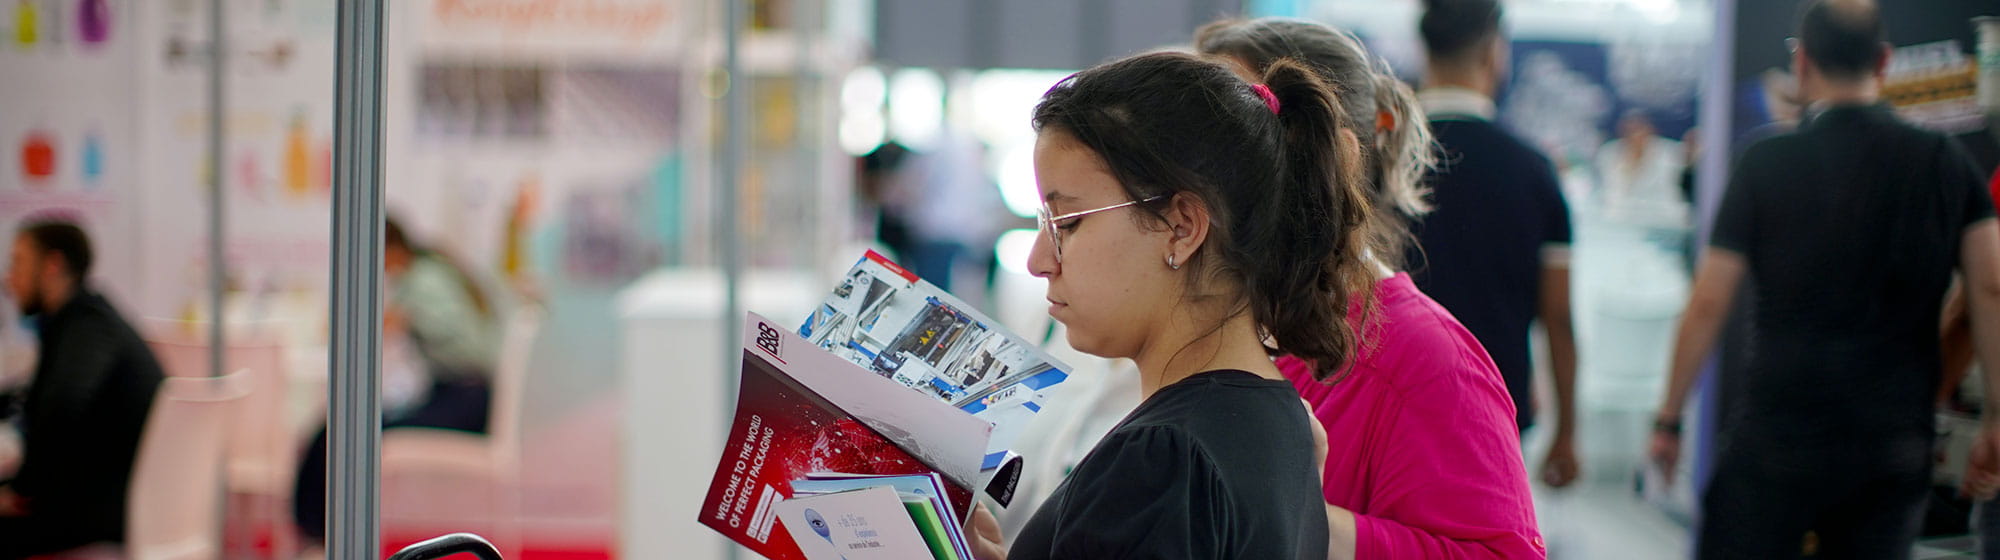 Two women reading several brochures